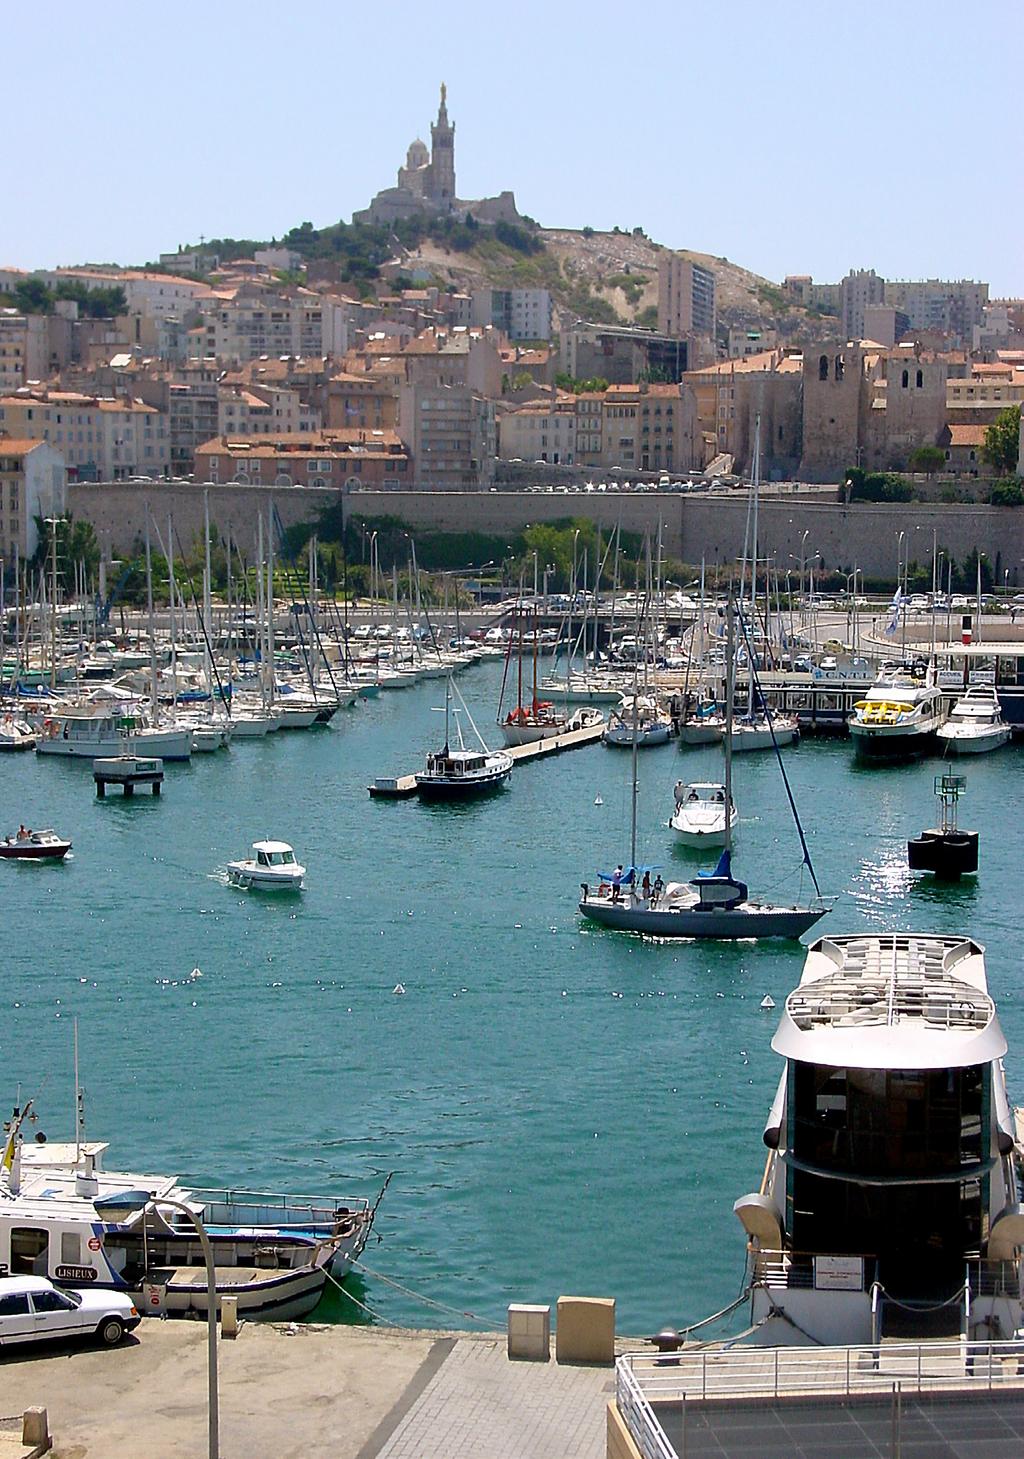 MARSEILLE, FRANCE Marseille France has many interesting tourist attractions, museums and famous city landmarks.